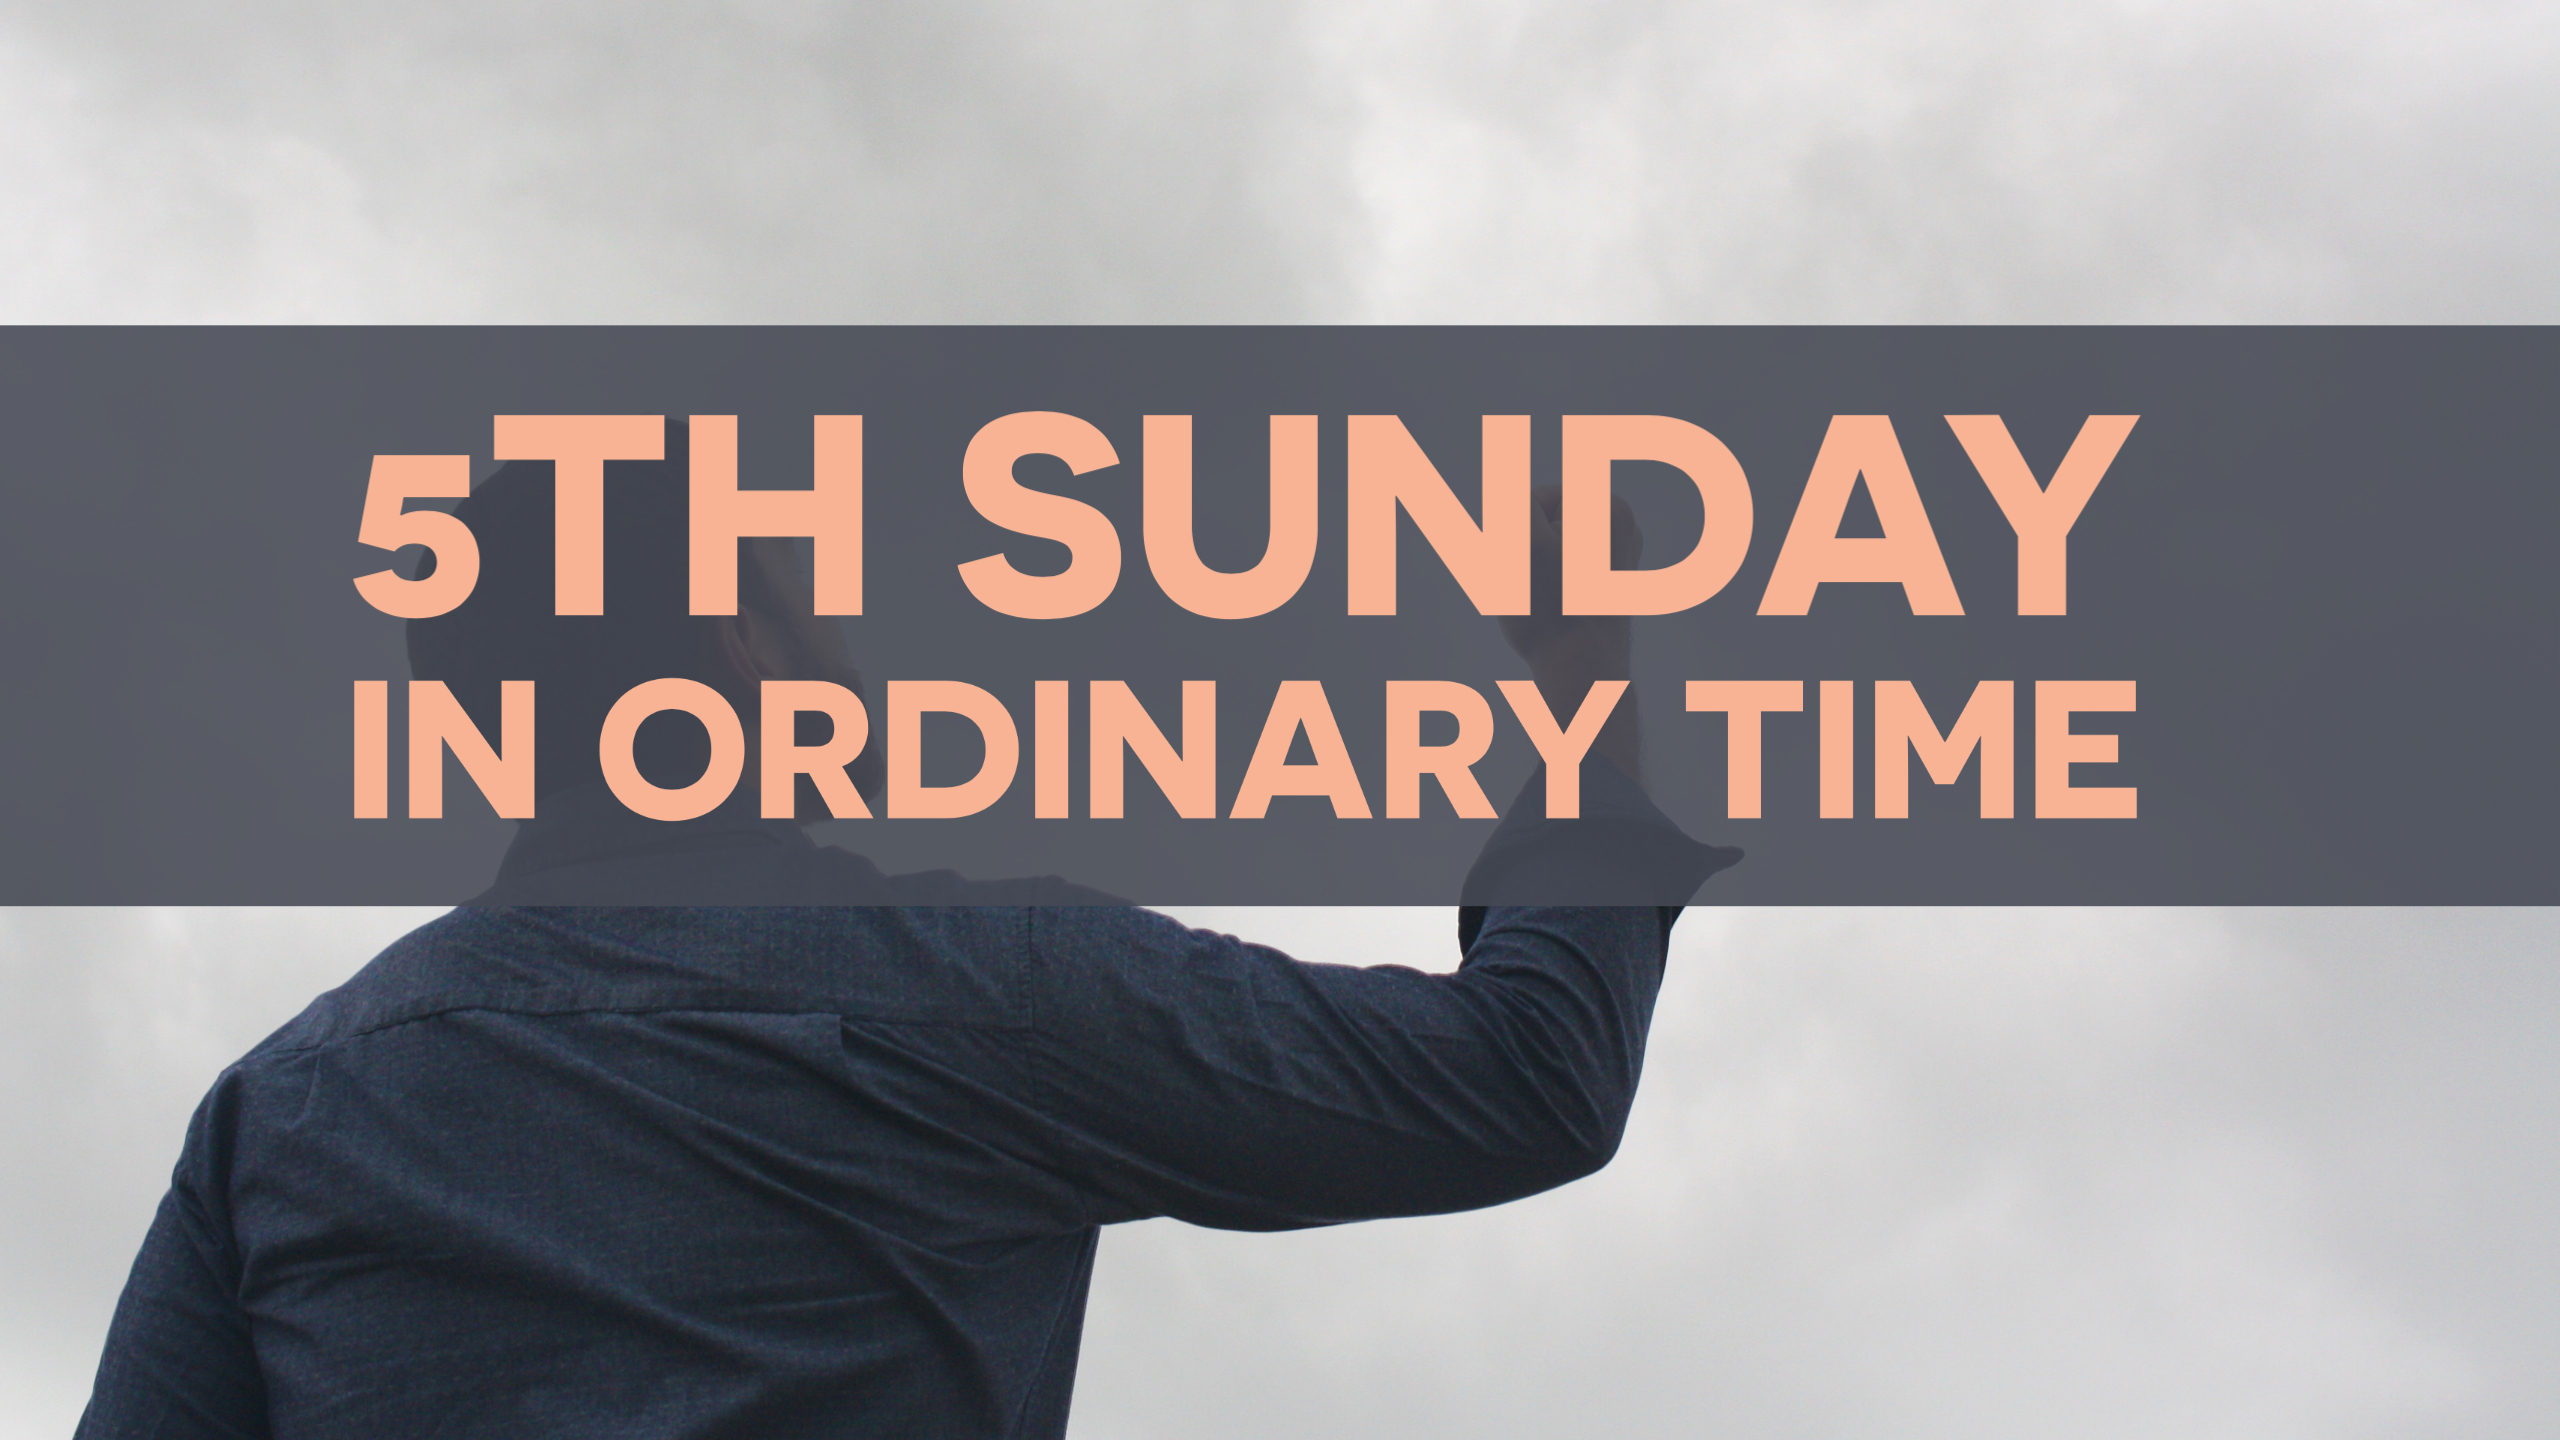 5th Sunday in Ordinary Time